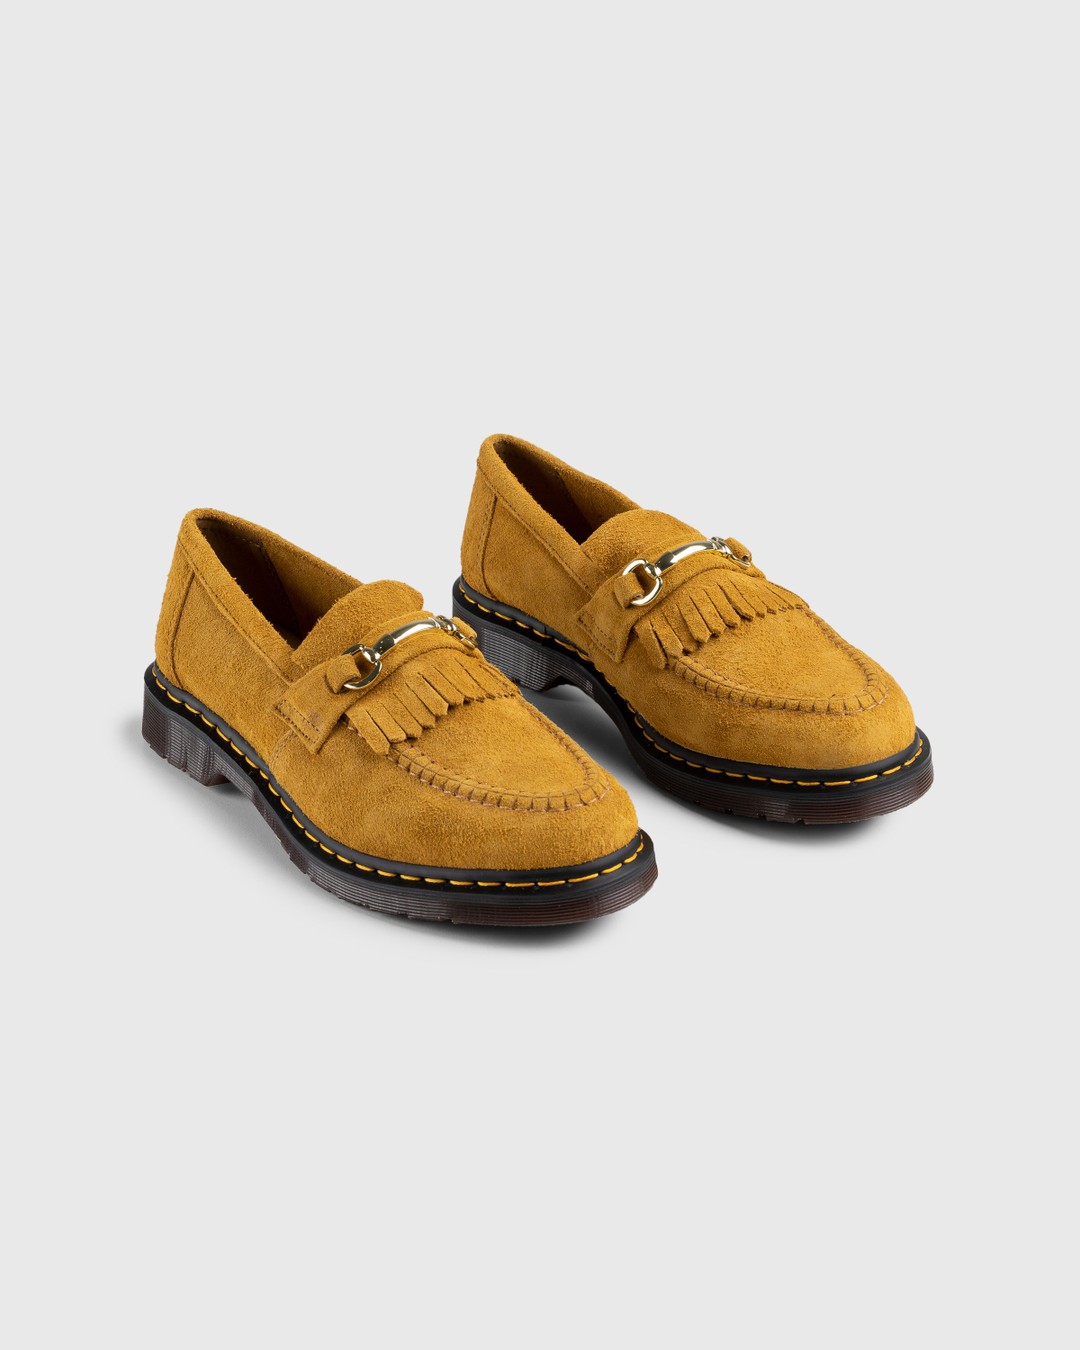 Dr. Martens – Adrian Snaffle Suede Loafers Light Tan Desert Oasis Suede (Gum Oil) - Shoes - Brown - Image 3